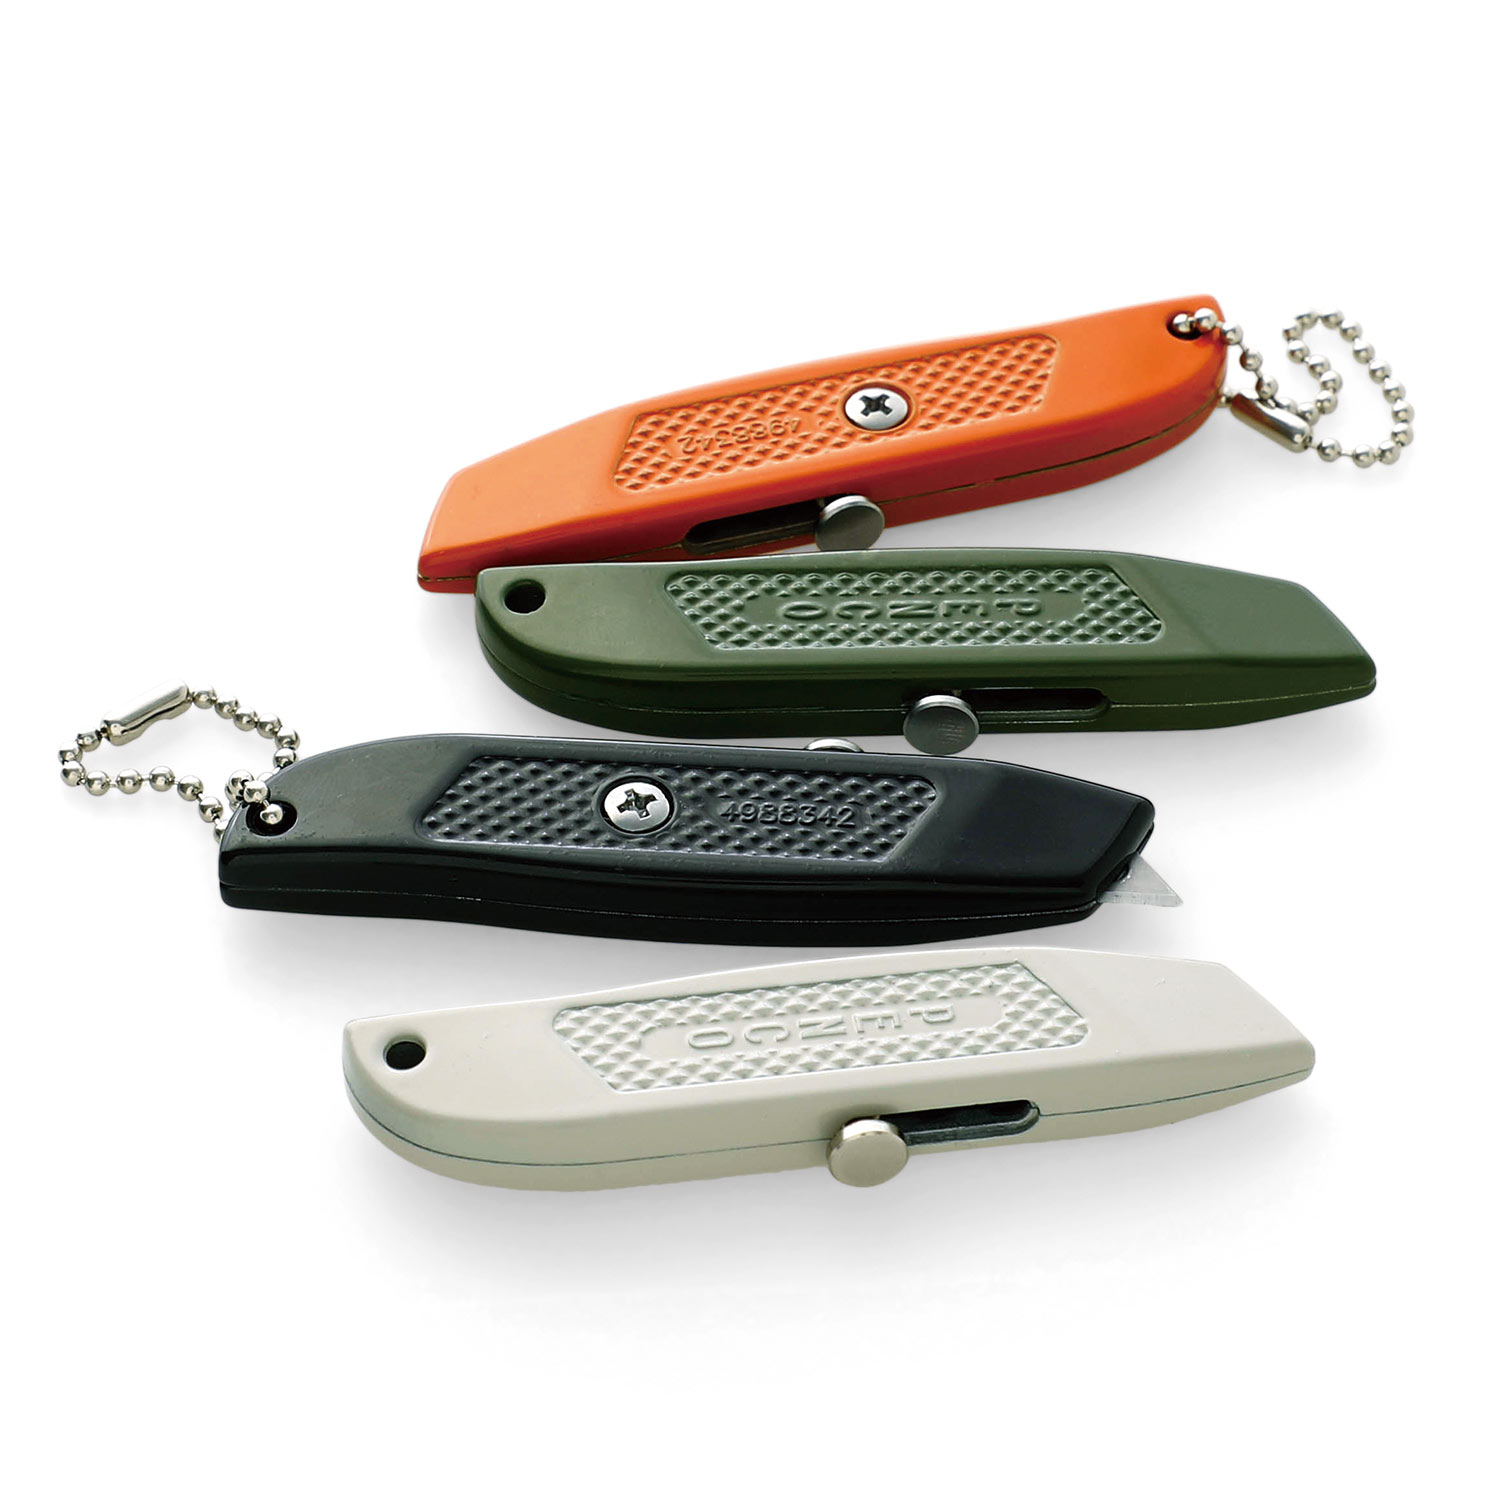 UTILITY KNIFE - penco® stationery & supplies